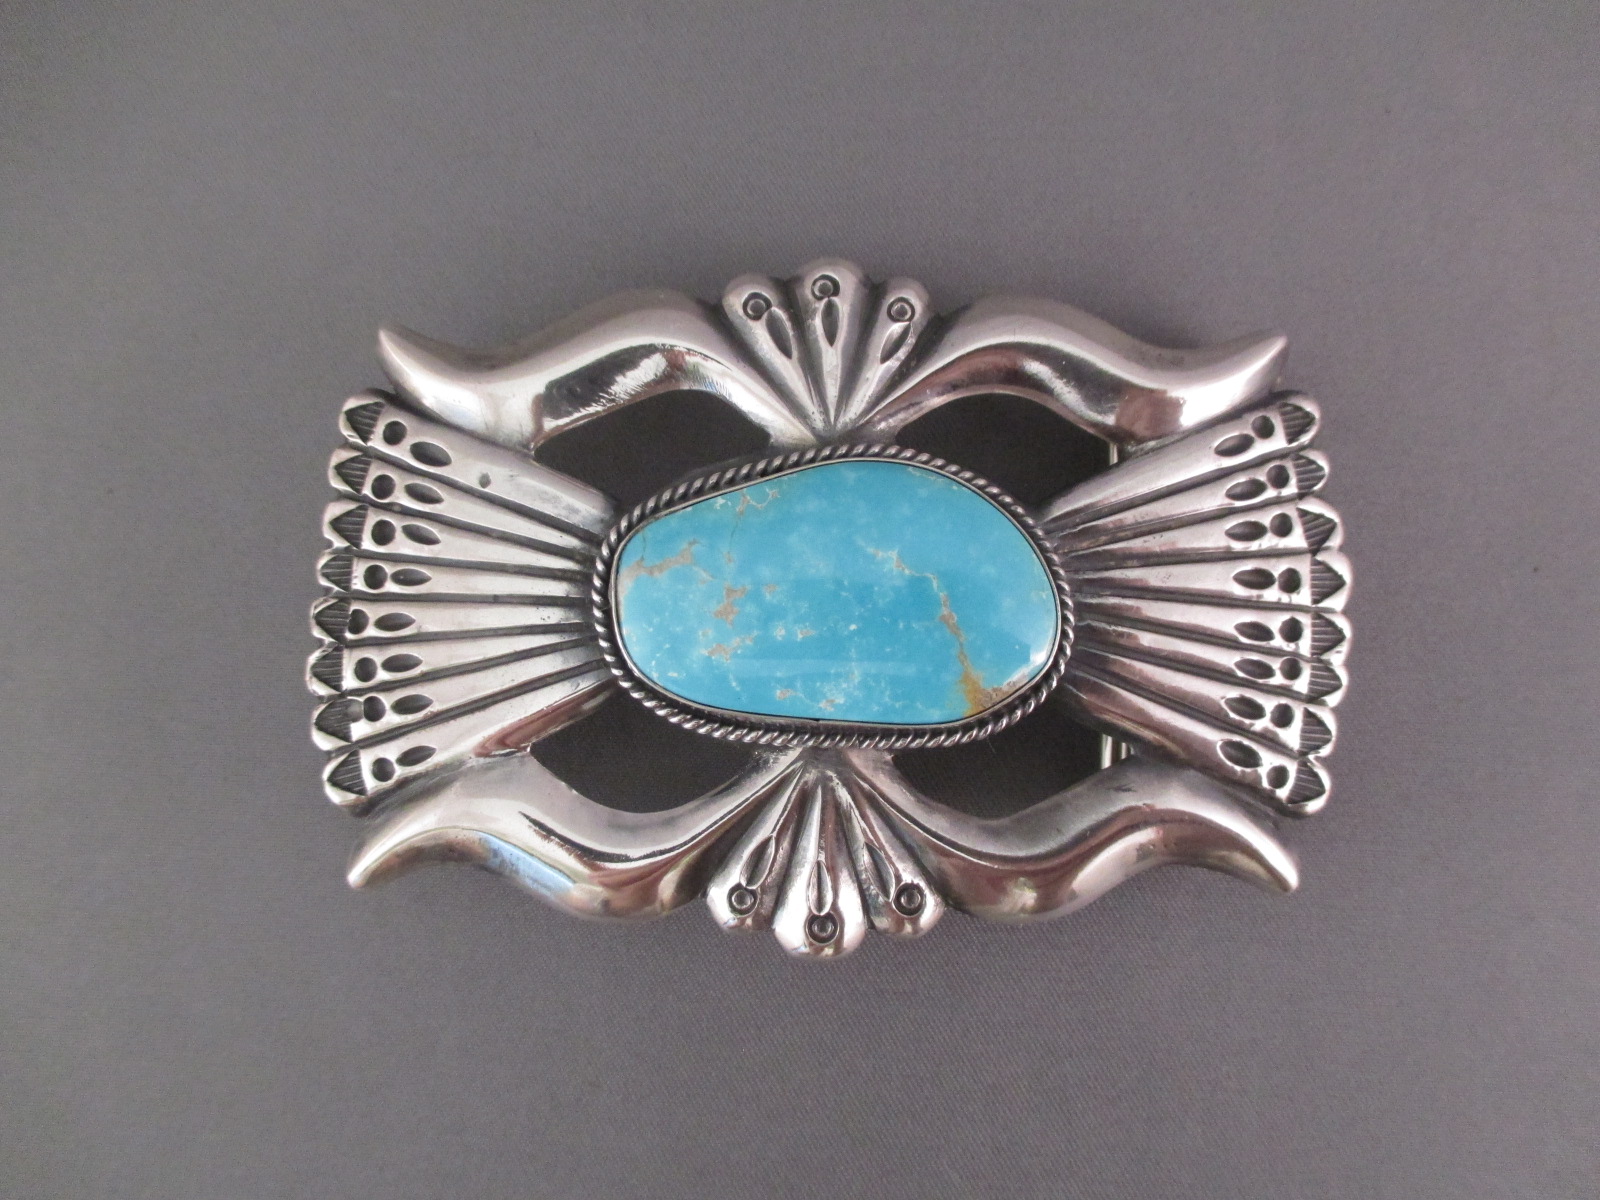 Sandcast Sterling Silver & Morenci Turquoise Belt Buckle by Navajo jewelry artist, Wilson Begay $650-